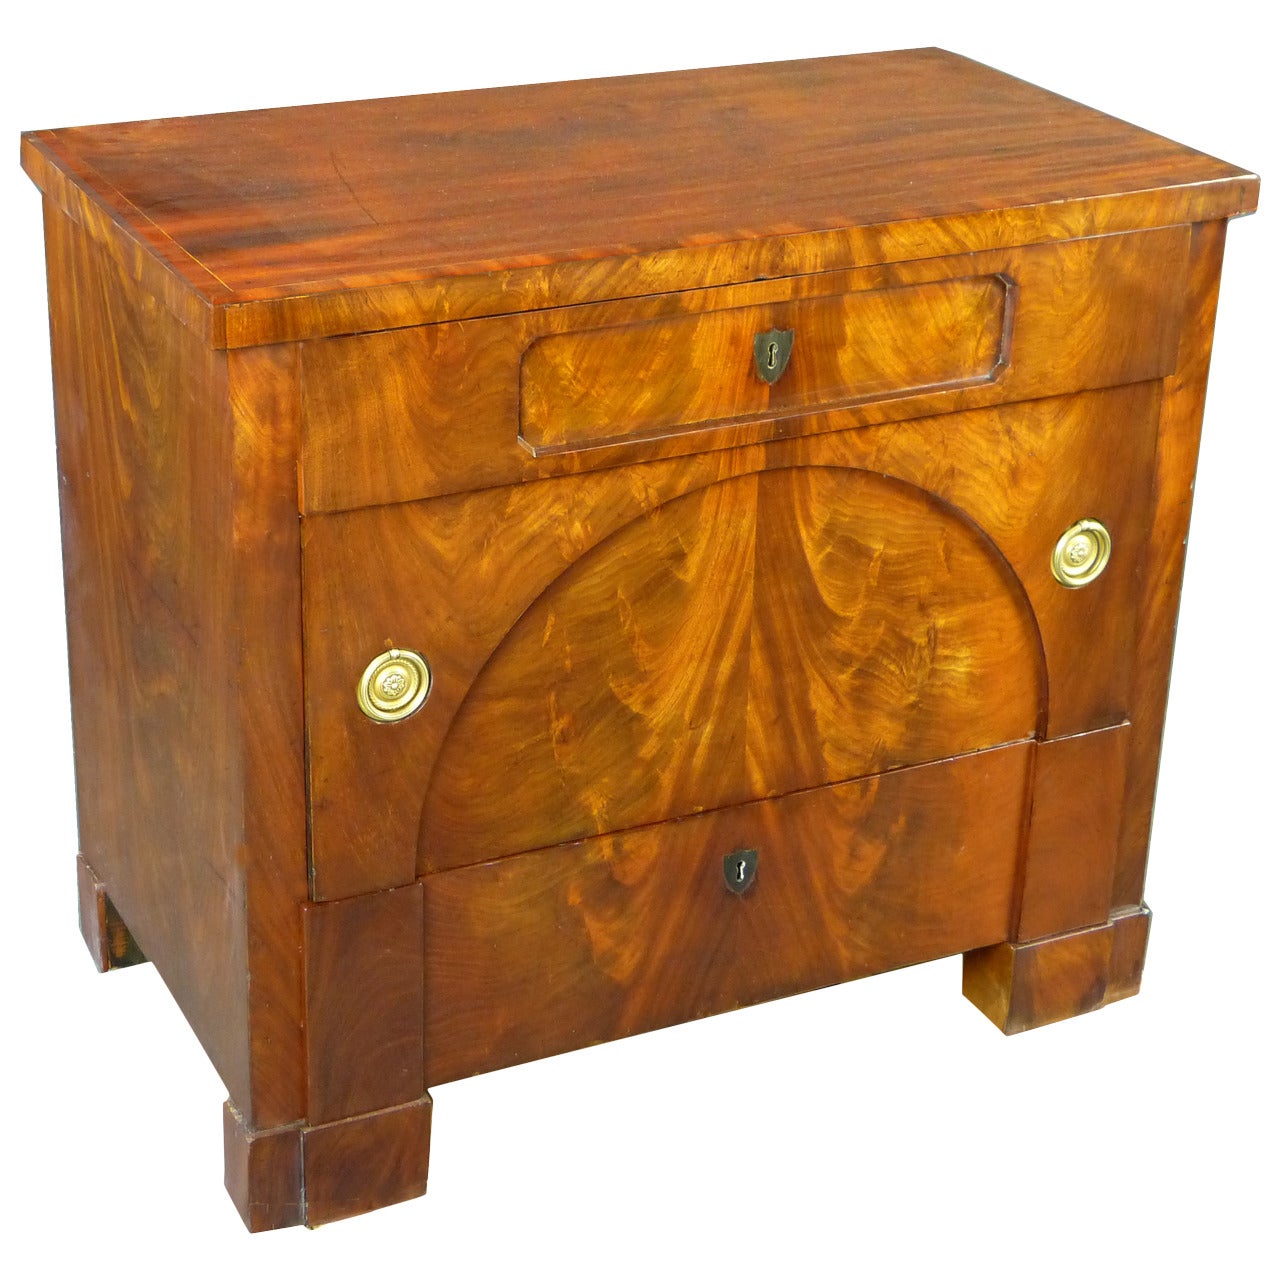 Early 19th Century Biedermeier Petite Commode or Chest of Drawers